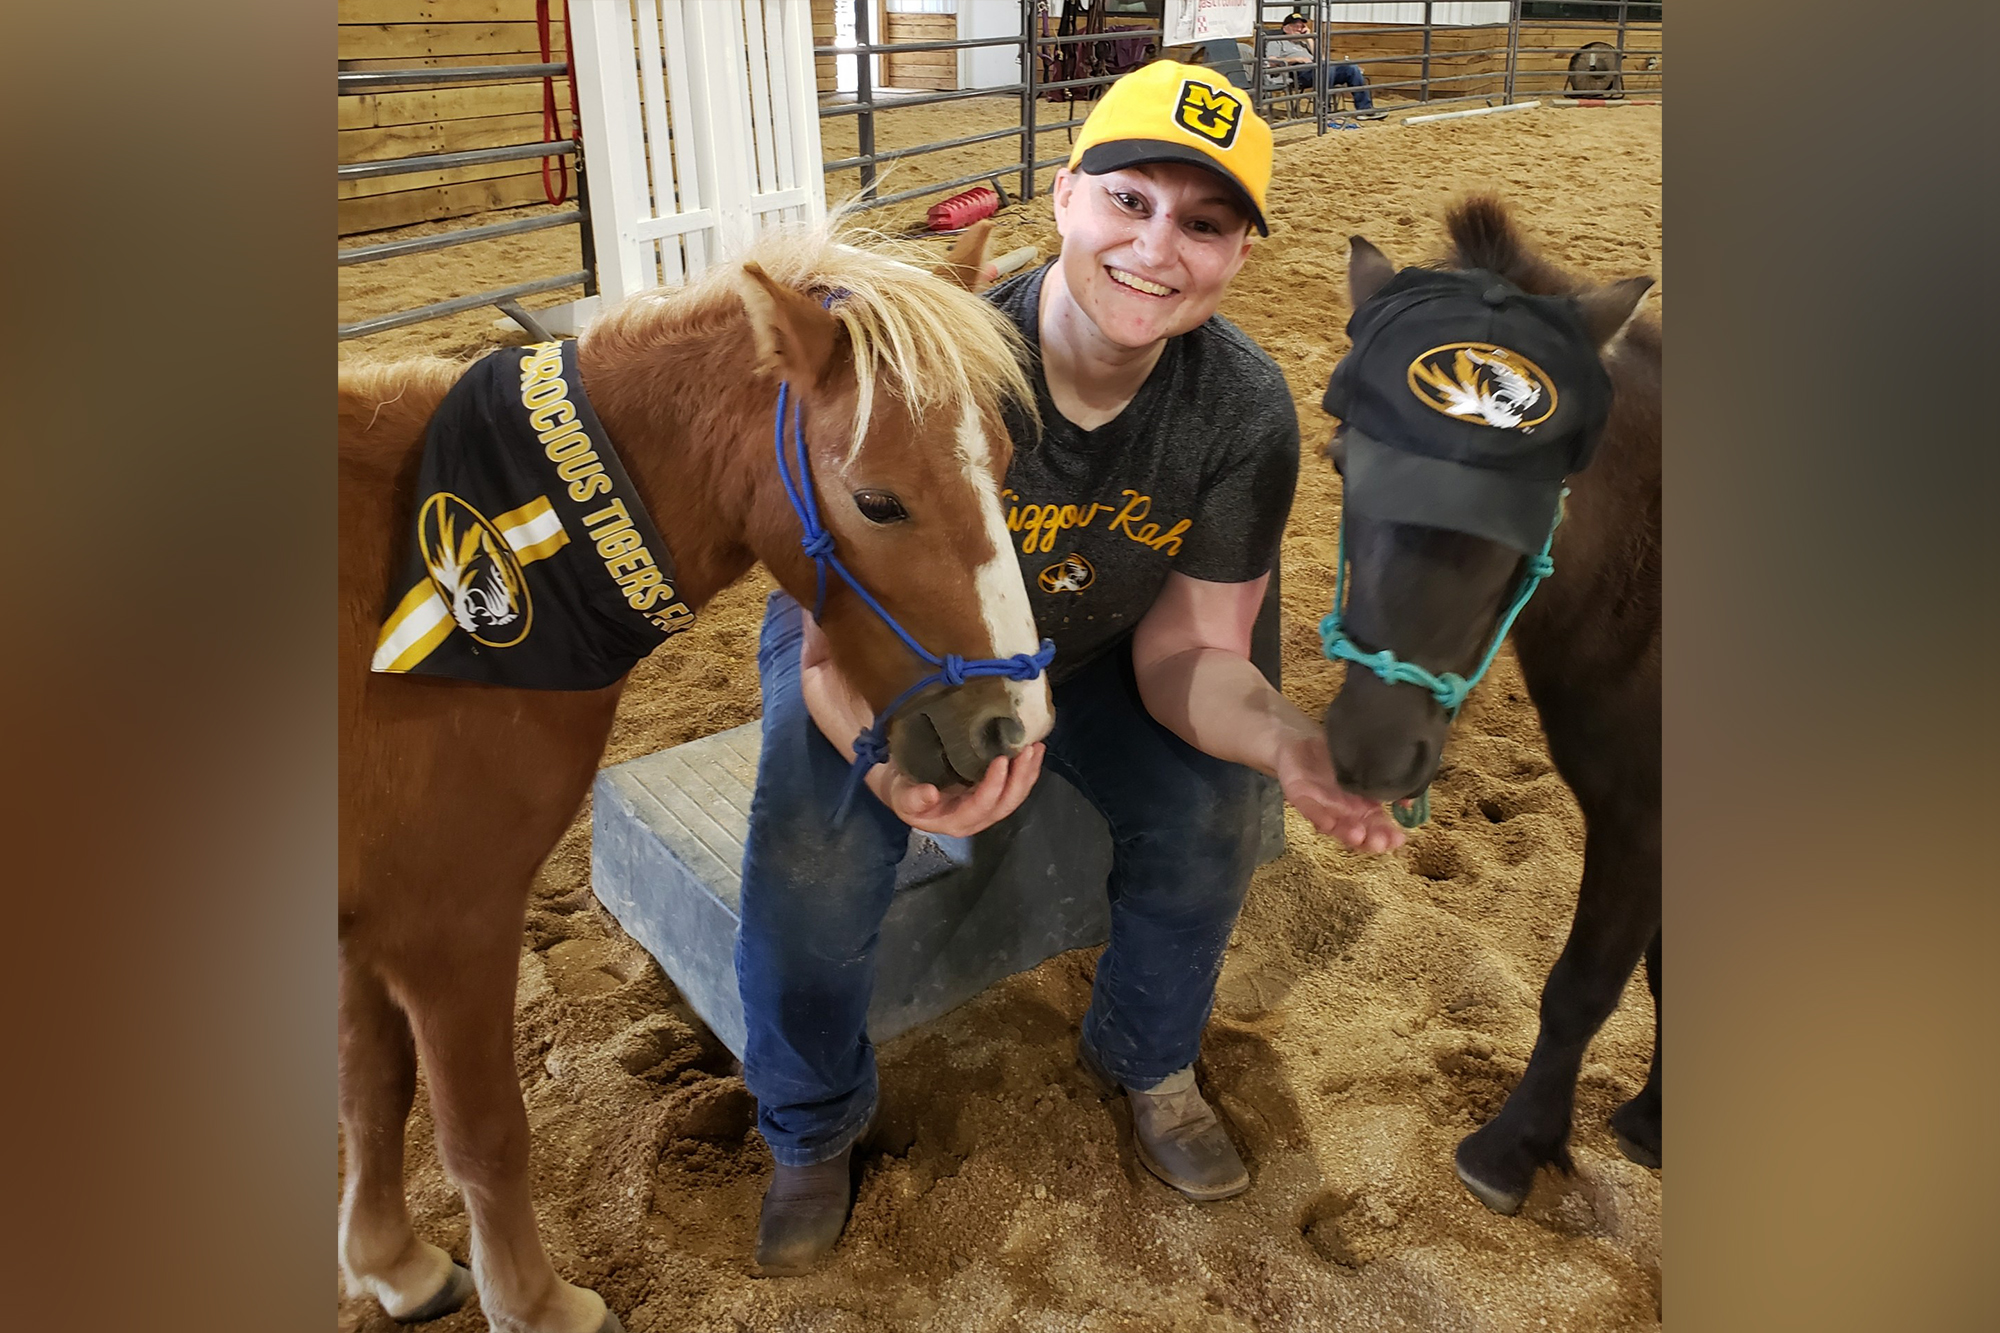 two horses in mizzou gear. a woman poses for a picture with them